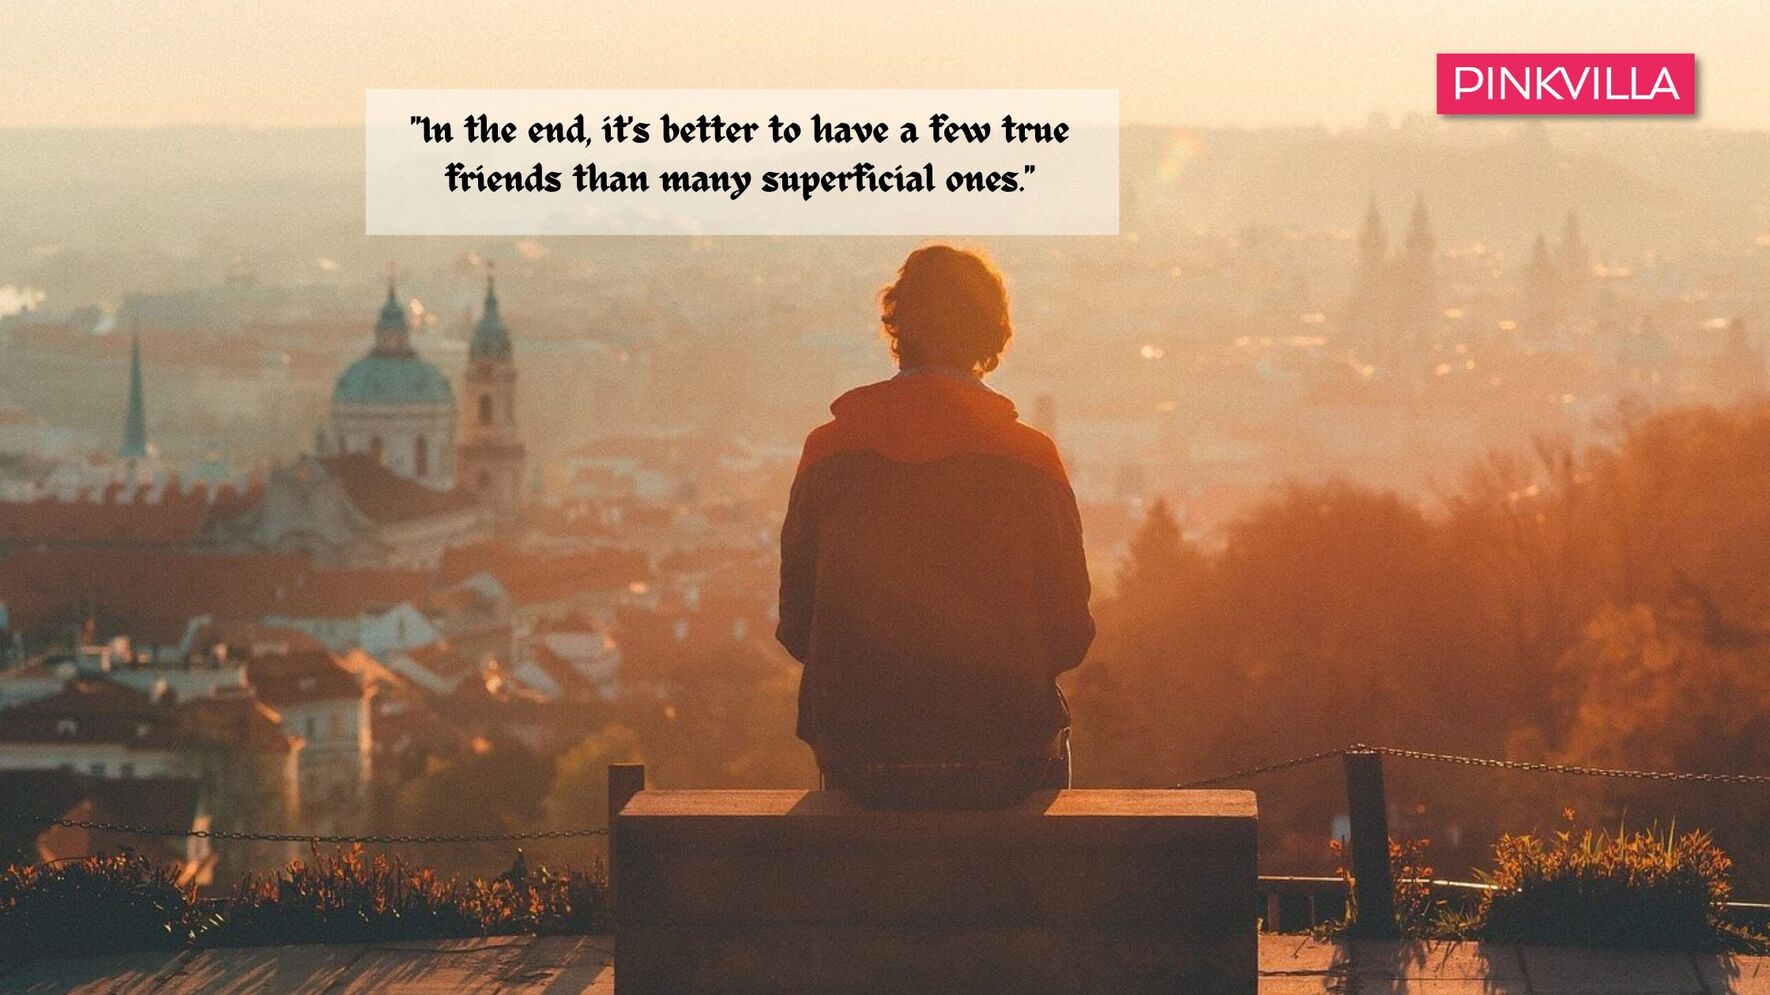 In The End, It's Better To Have A Few True Friends